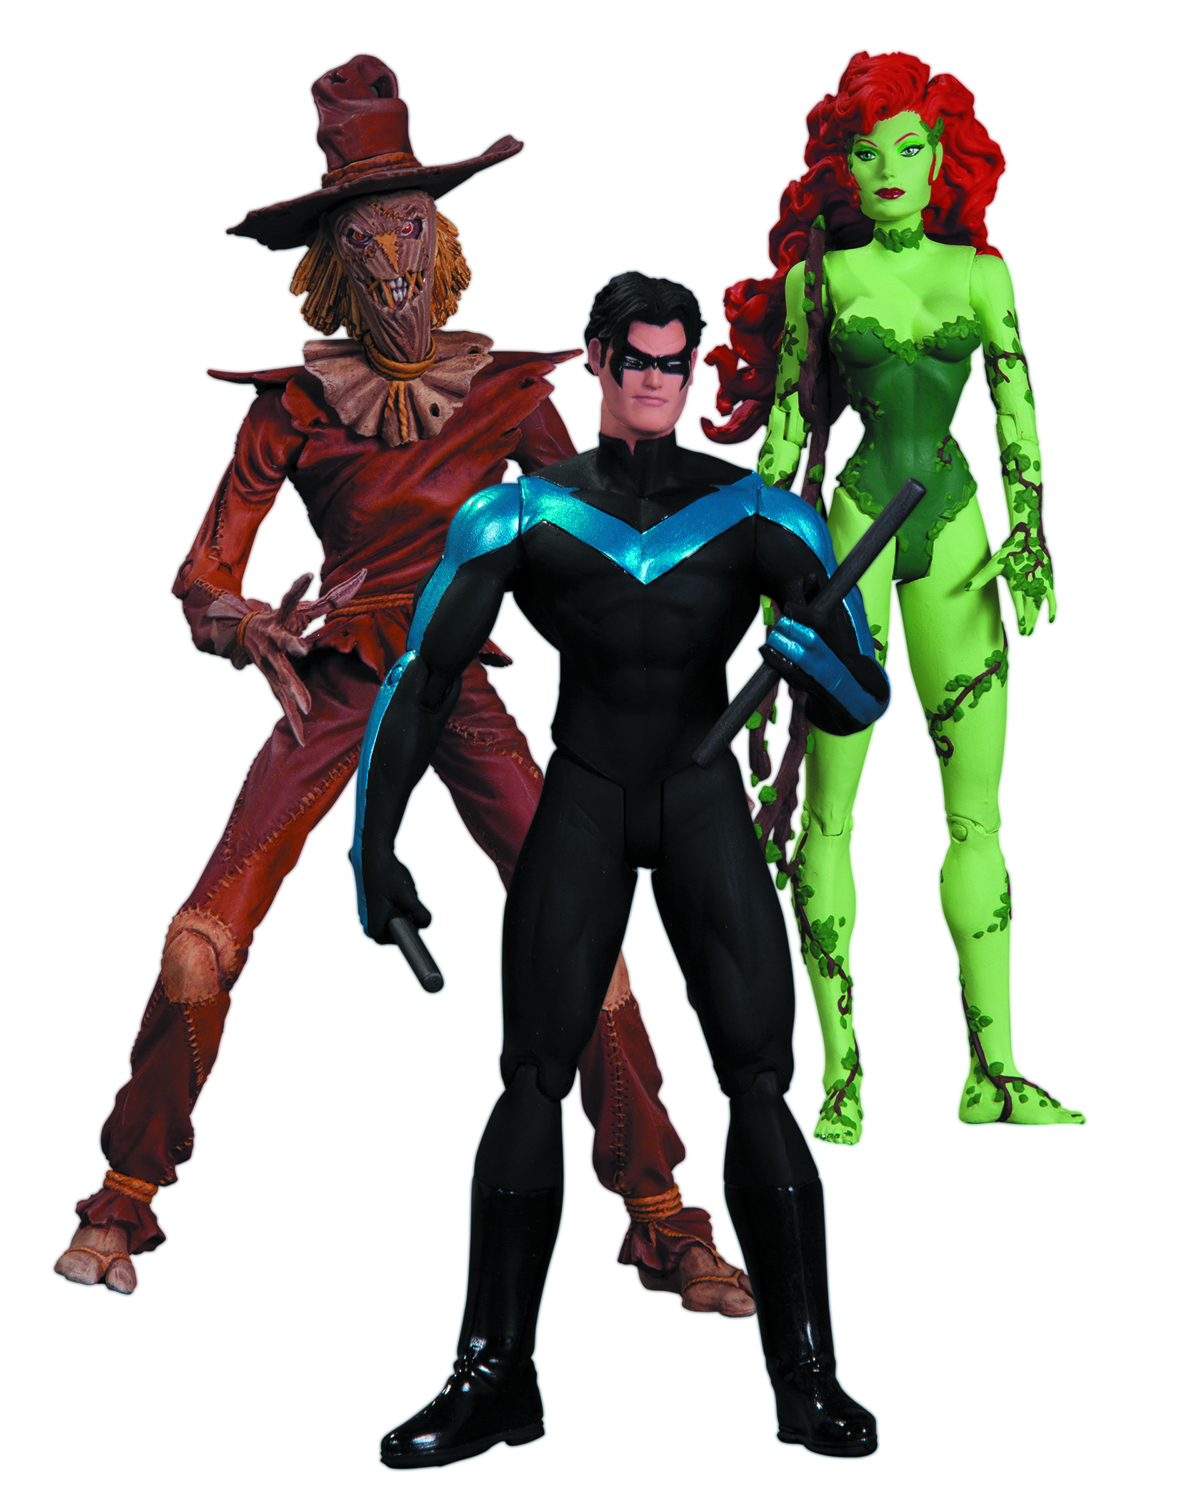 BATMAN HUSH: SCARECROW NIGHTWING POISON IVY ACTION FIGURE 3 PACK